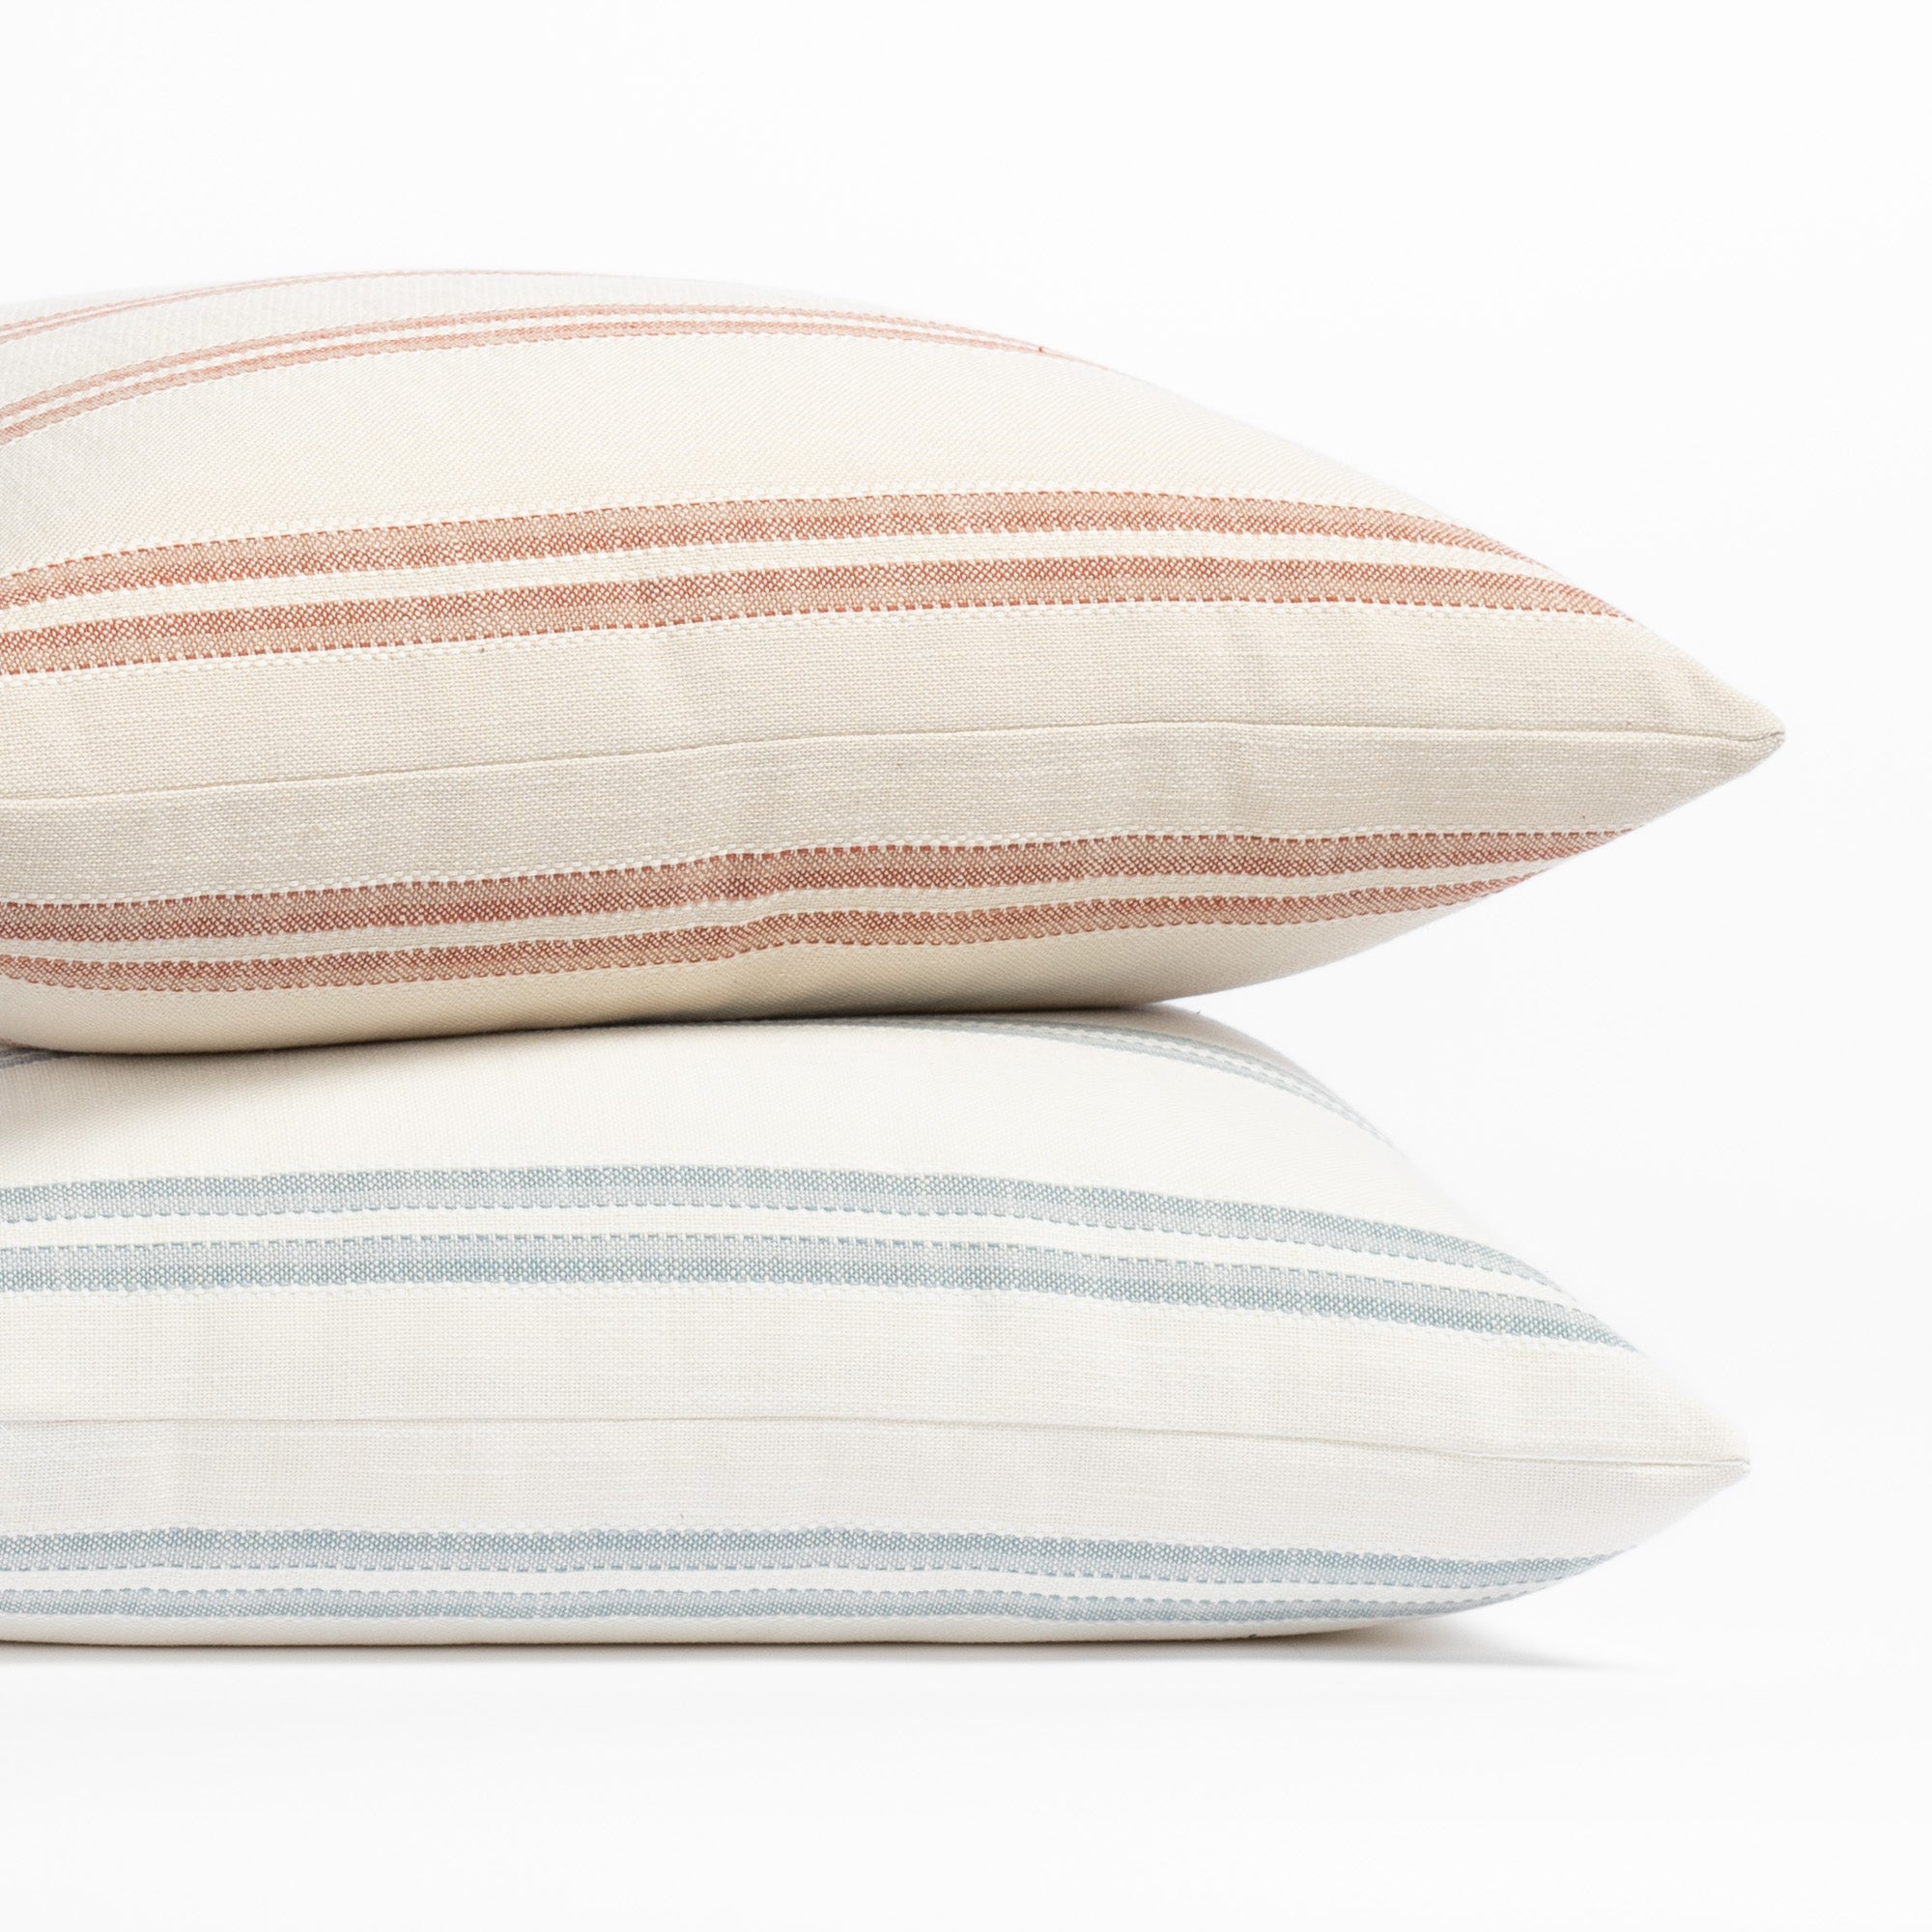 modern stripe patterned Tonic Living throw pillows : Riviera Stripe Clay and Riviera Stripe Mist